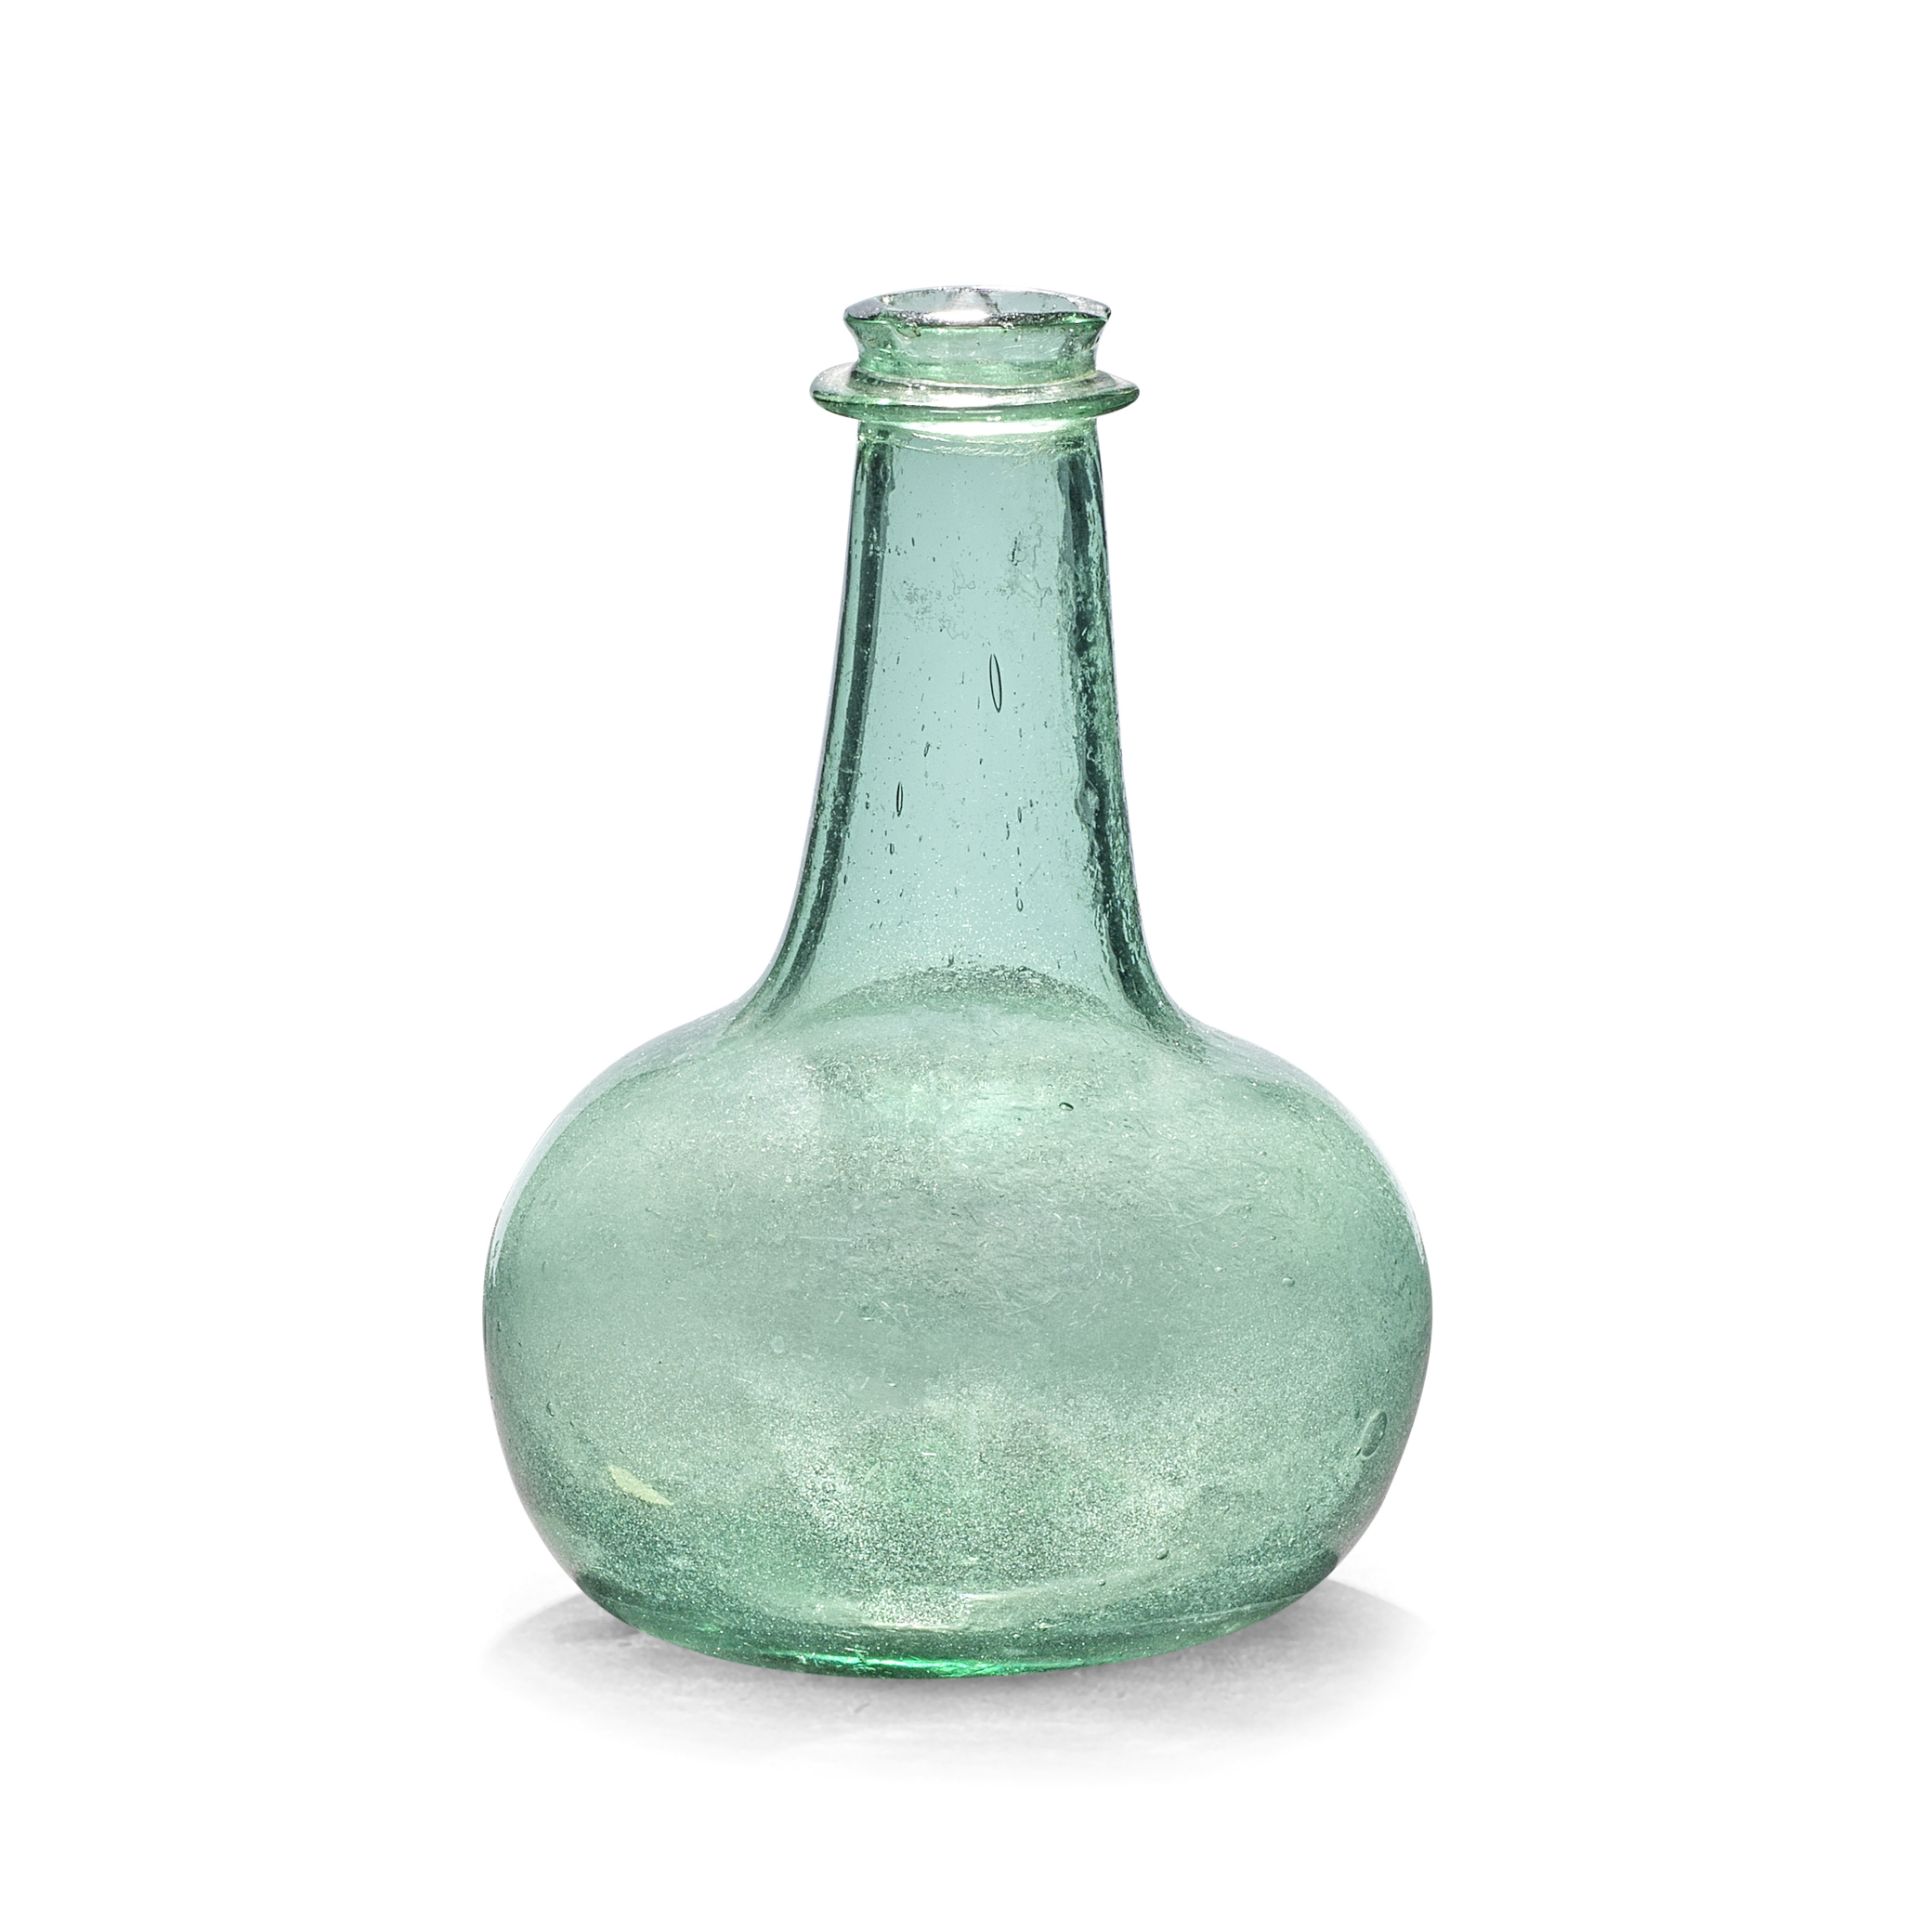 A very rare quarter size 'Shaft and Globe' wine bottle or apothecary vial, circa 1660-70